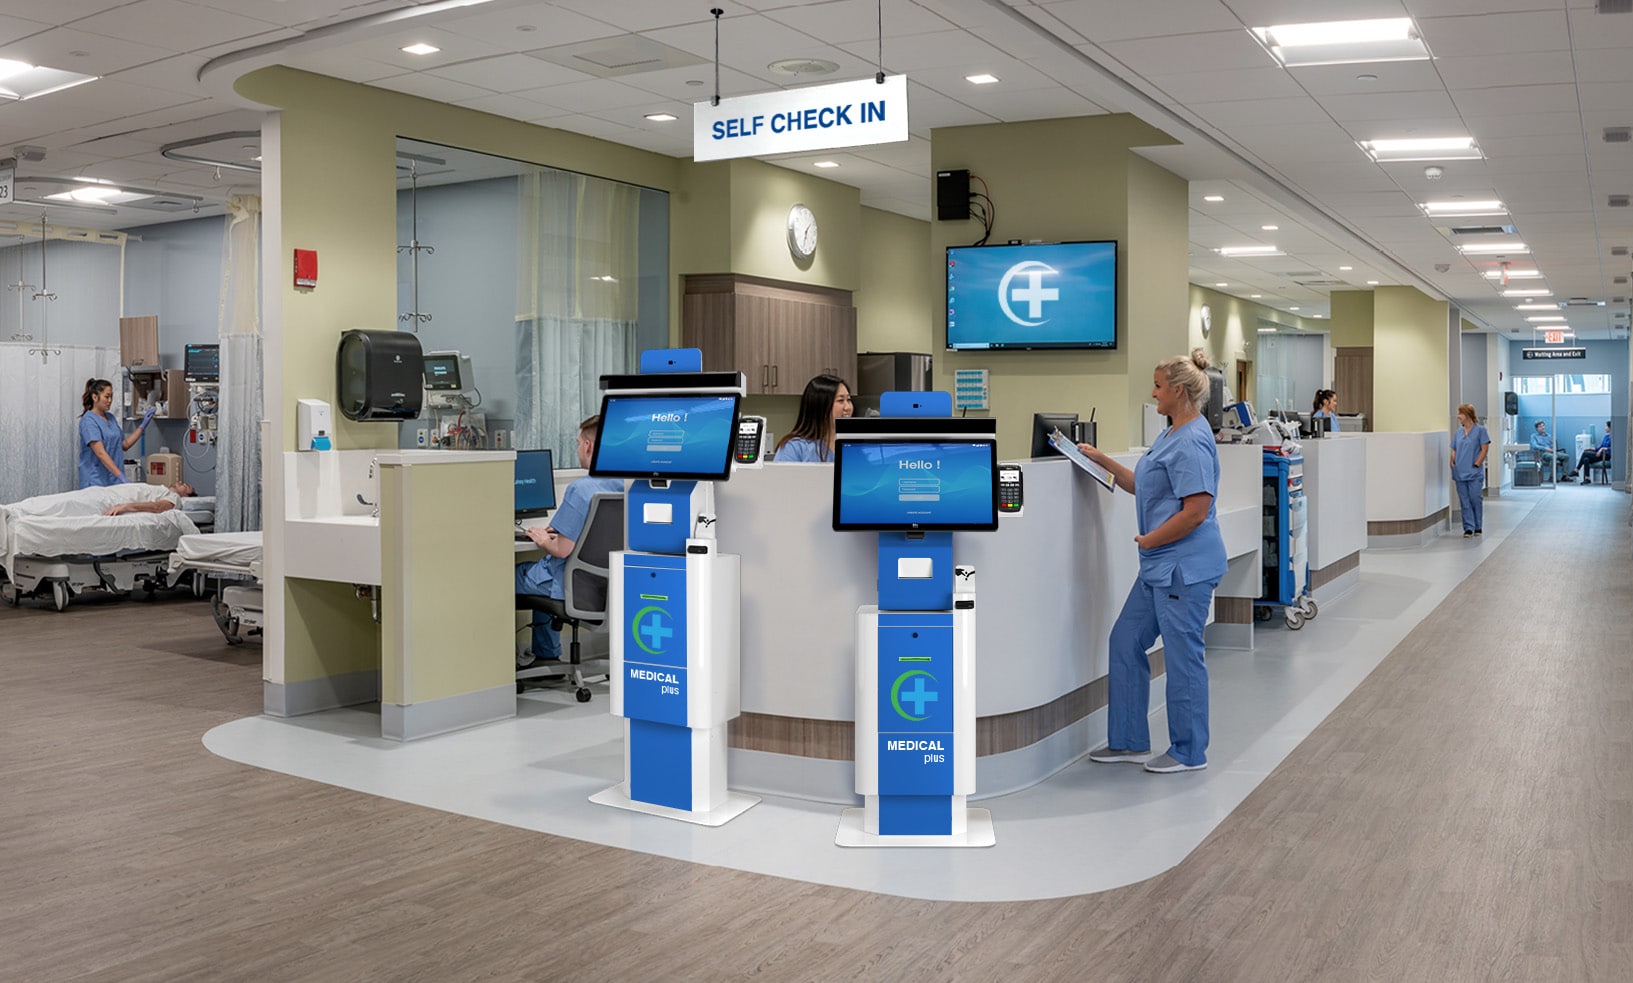 Two Blue Self Check In Kiosks